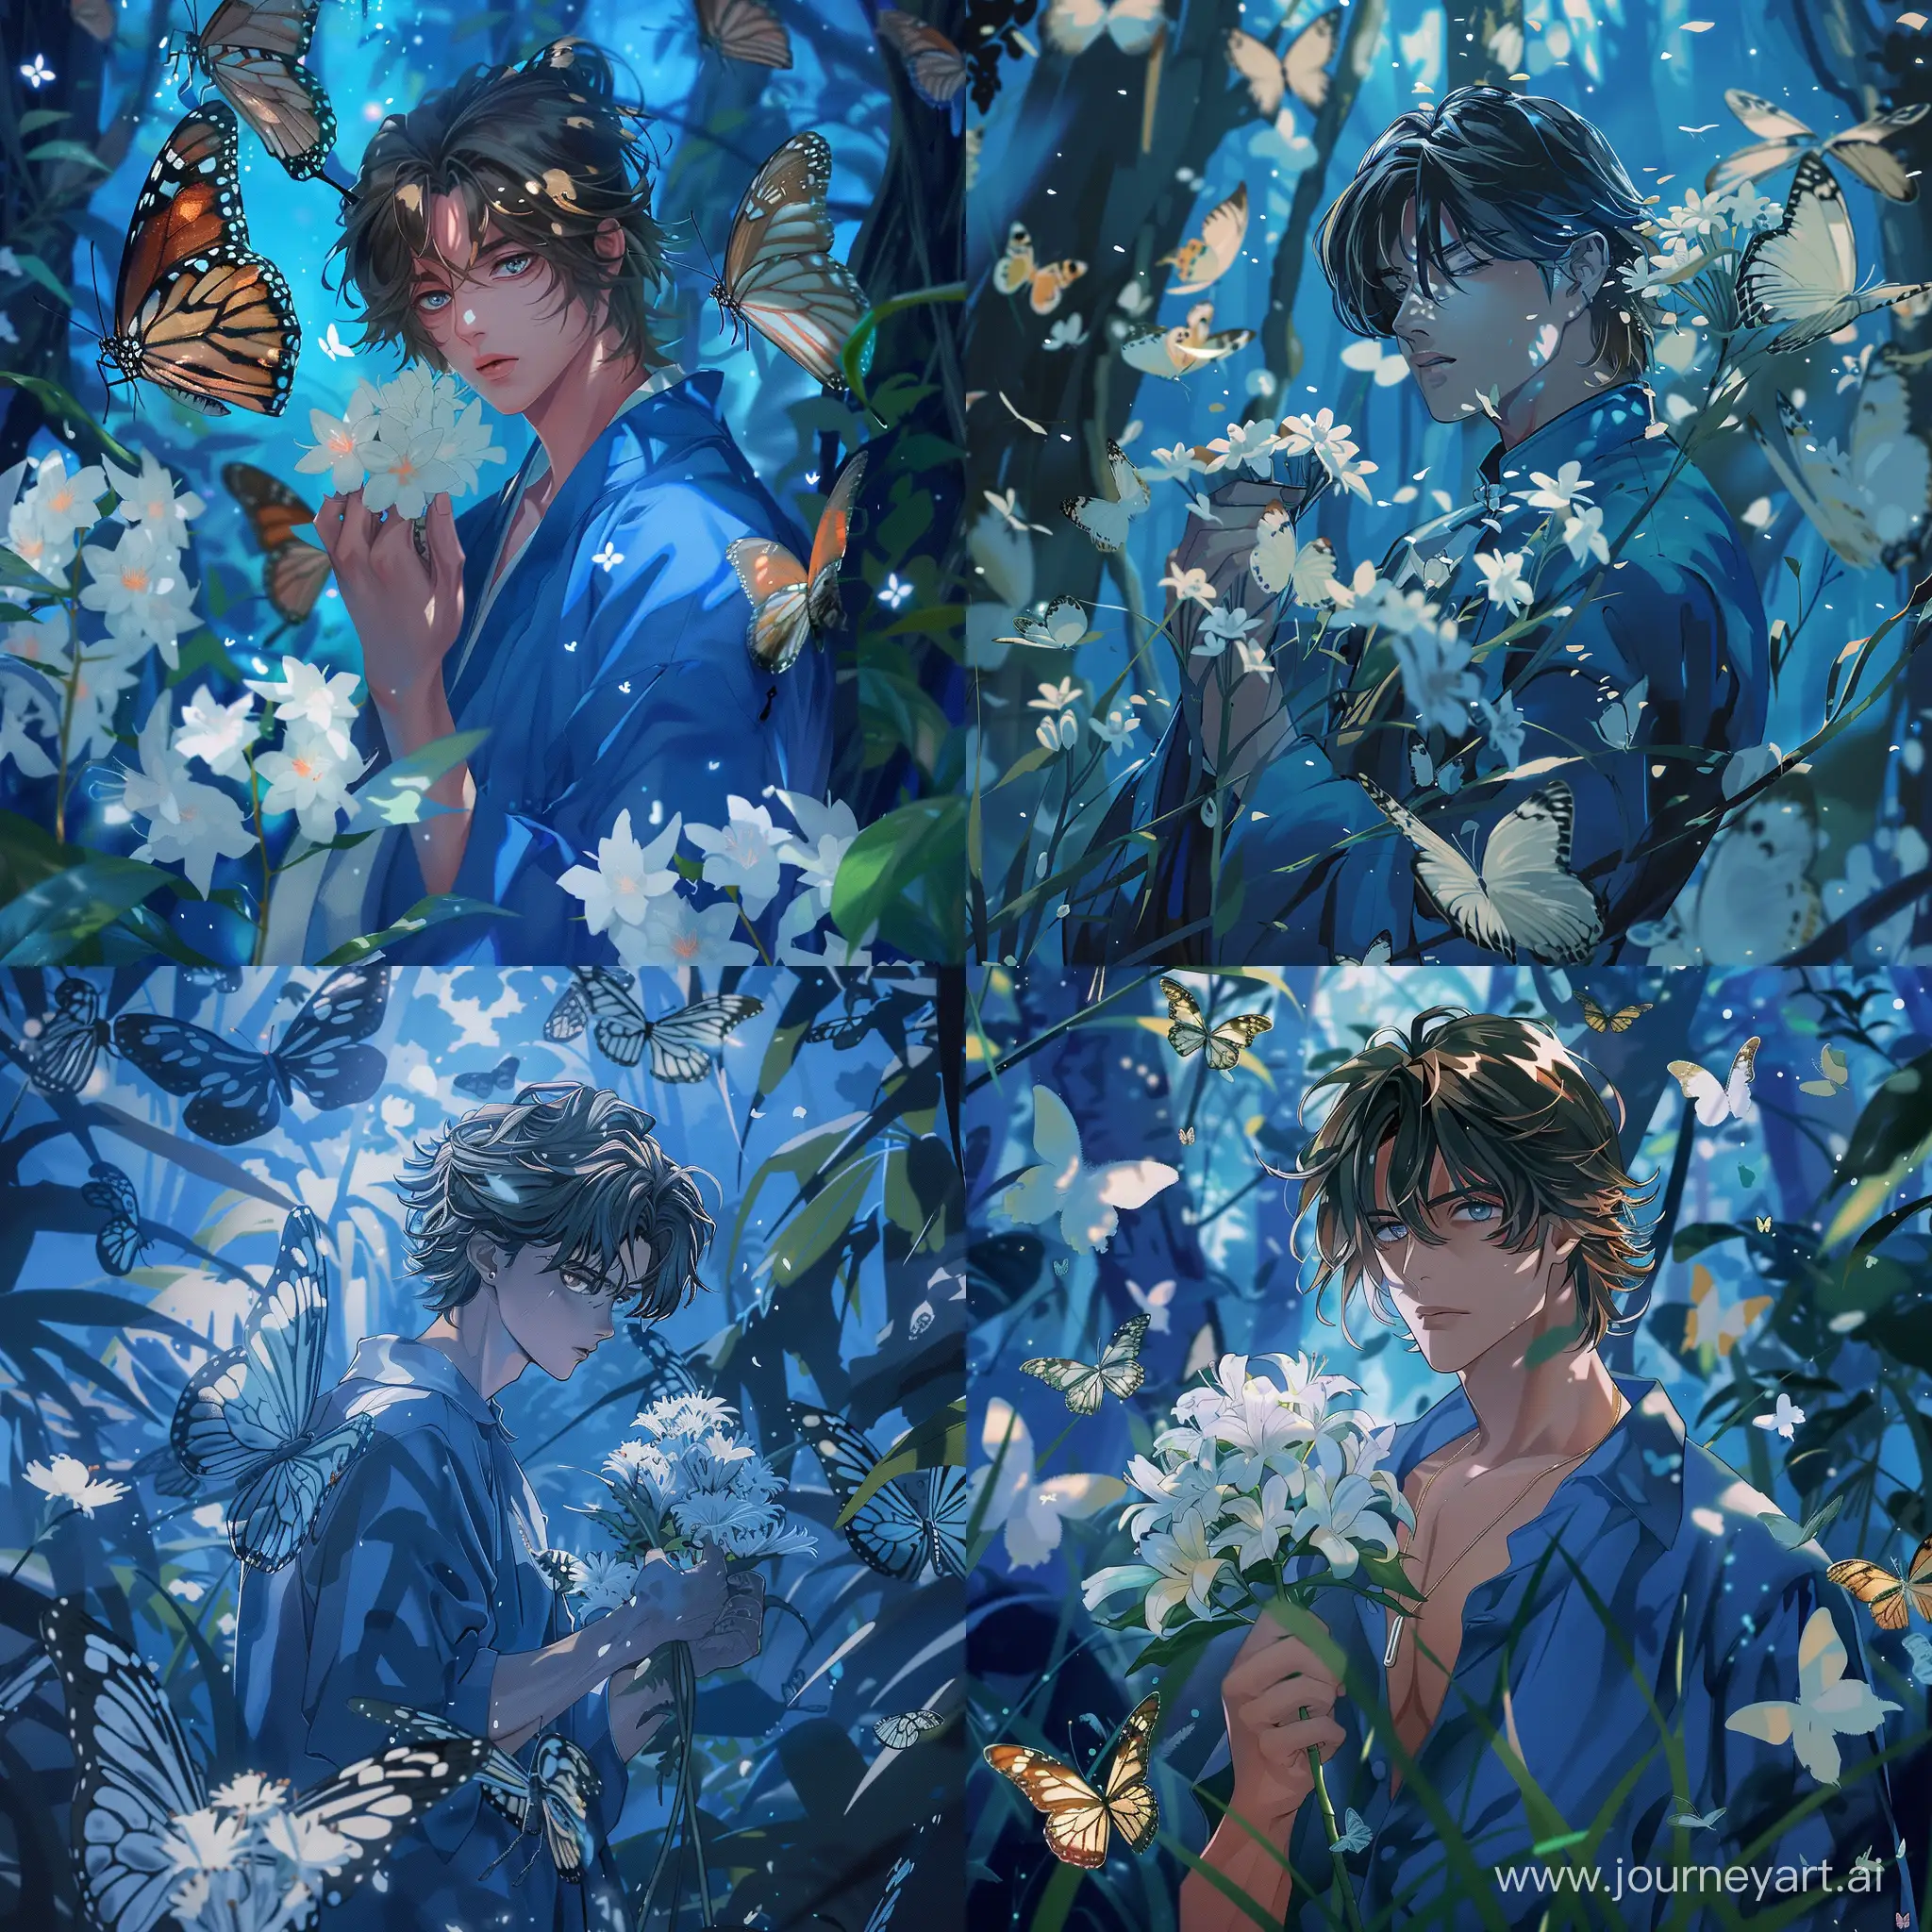 Anime-Man-Amidst-Giant-Butterflies-in-Blue-Forest-with-White-Flowers